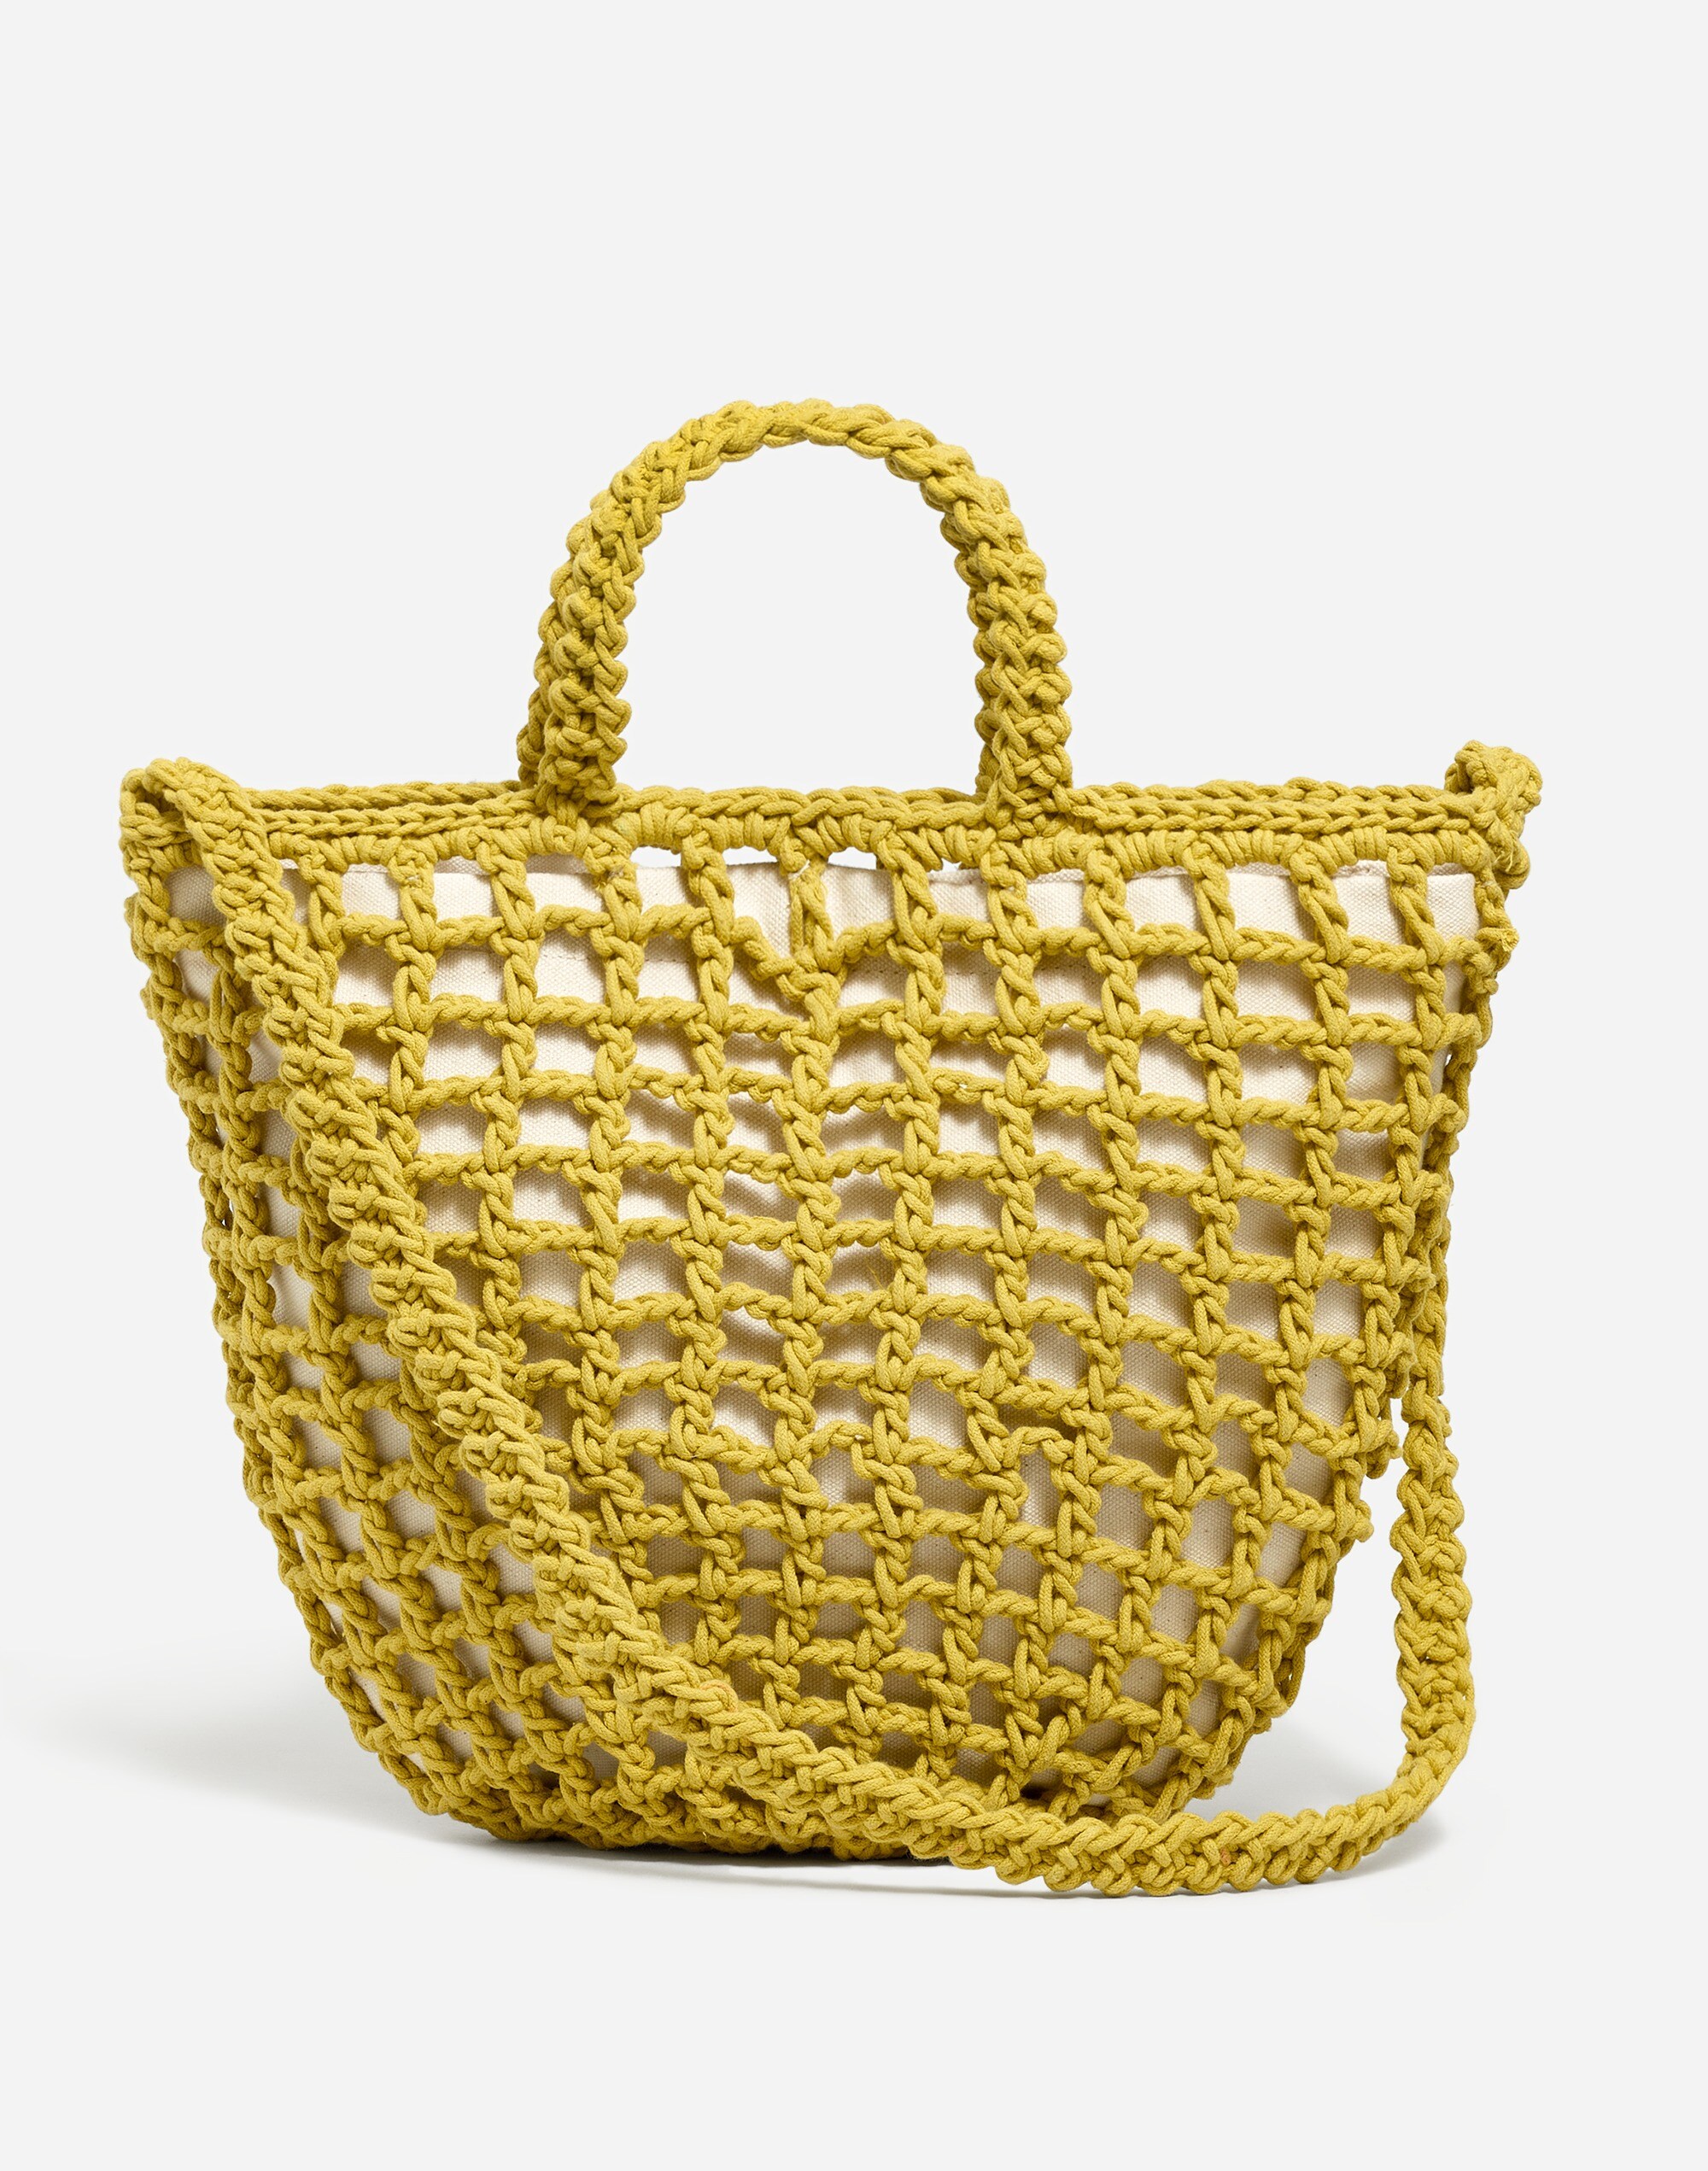 Mw The Crocheted Shoulder Bag In Gilded Chartreuse